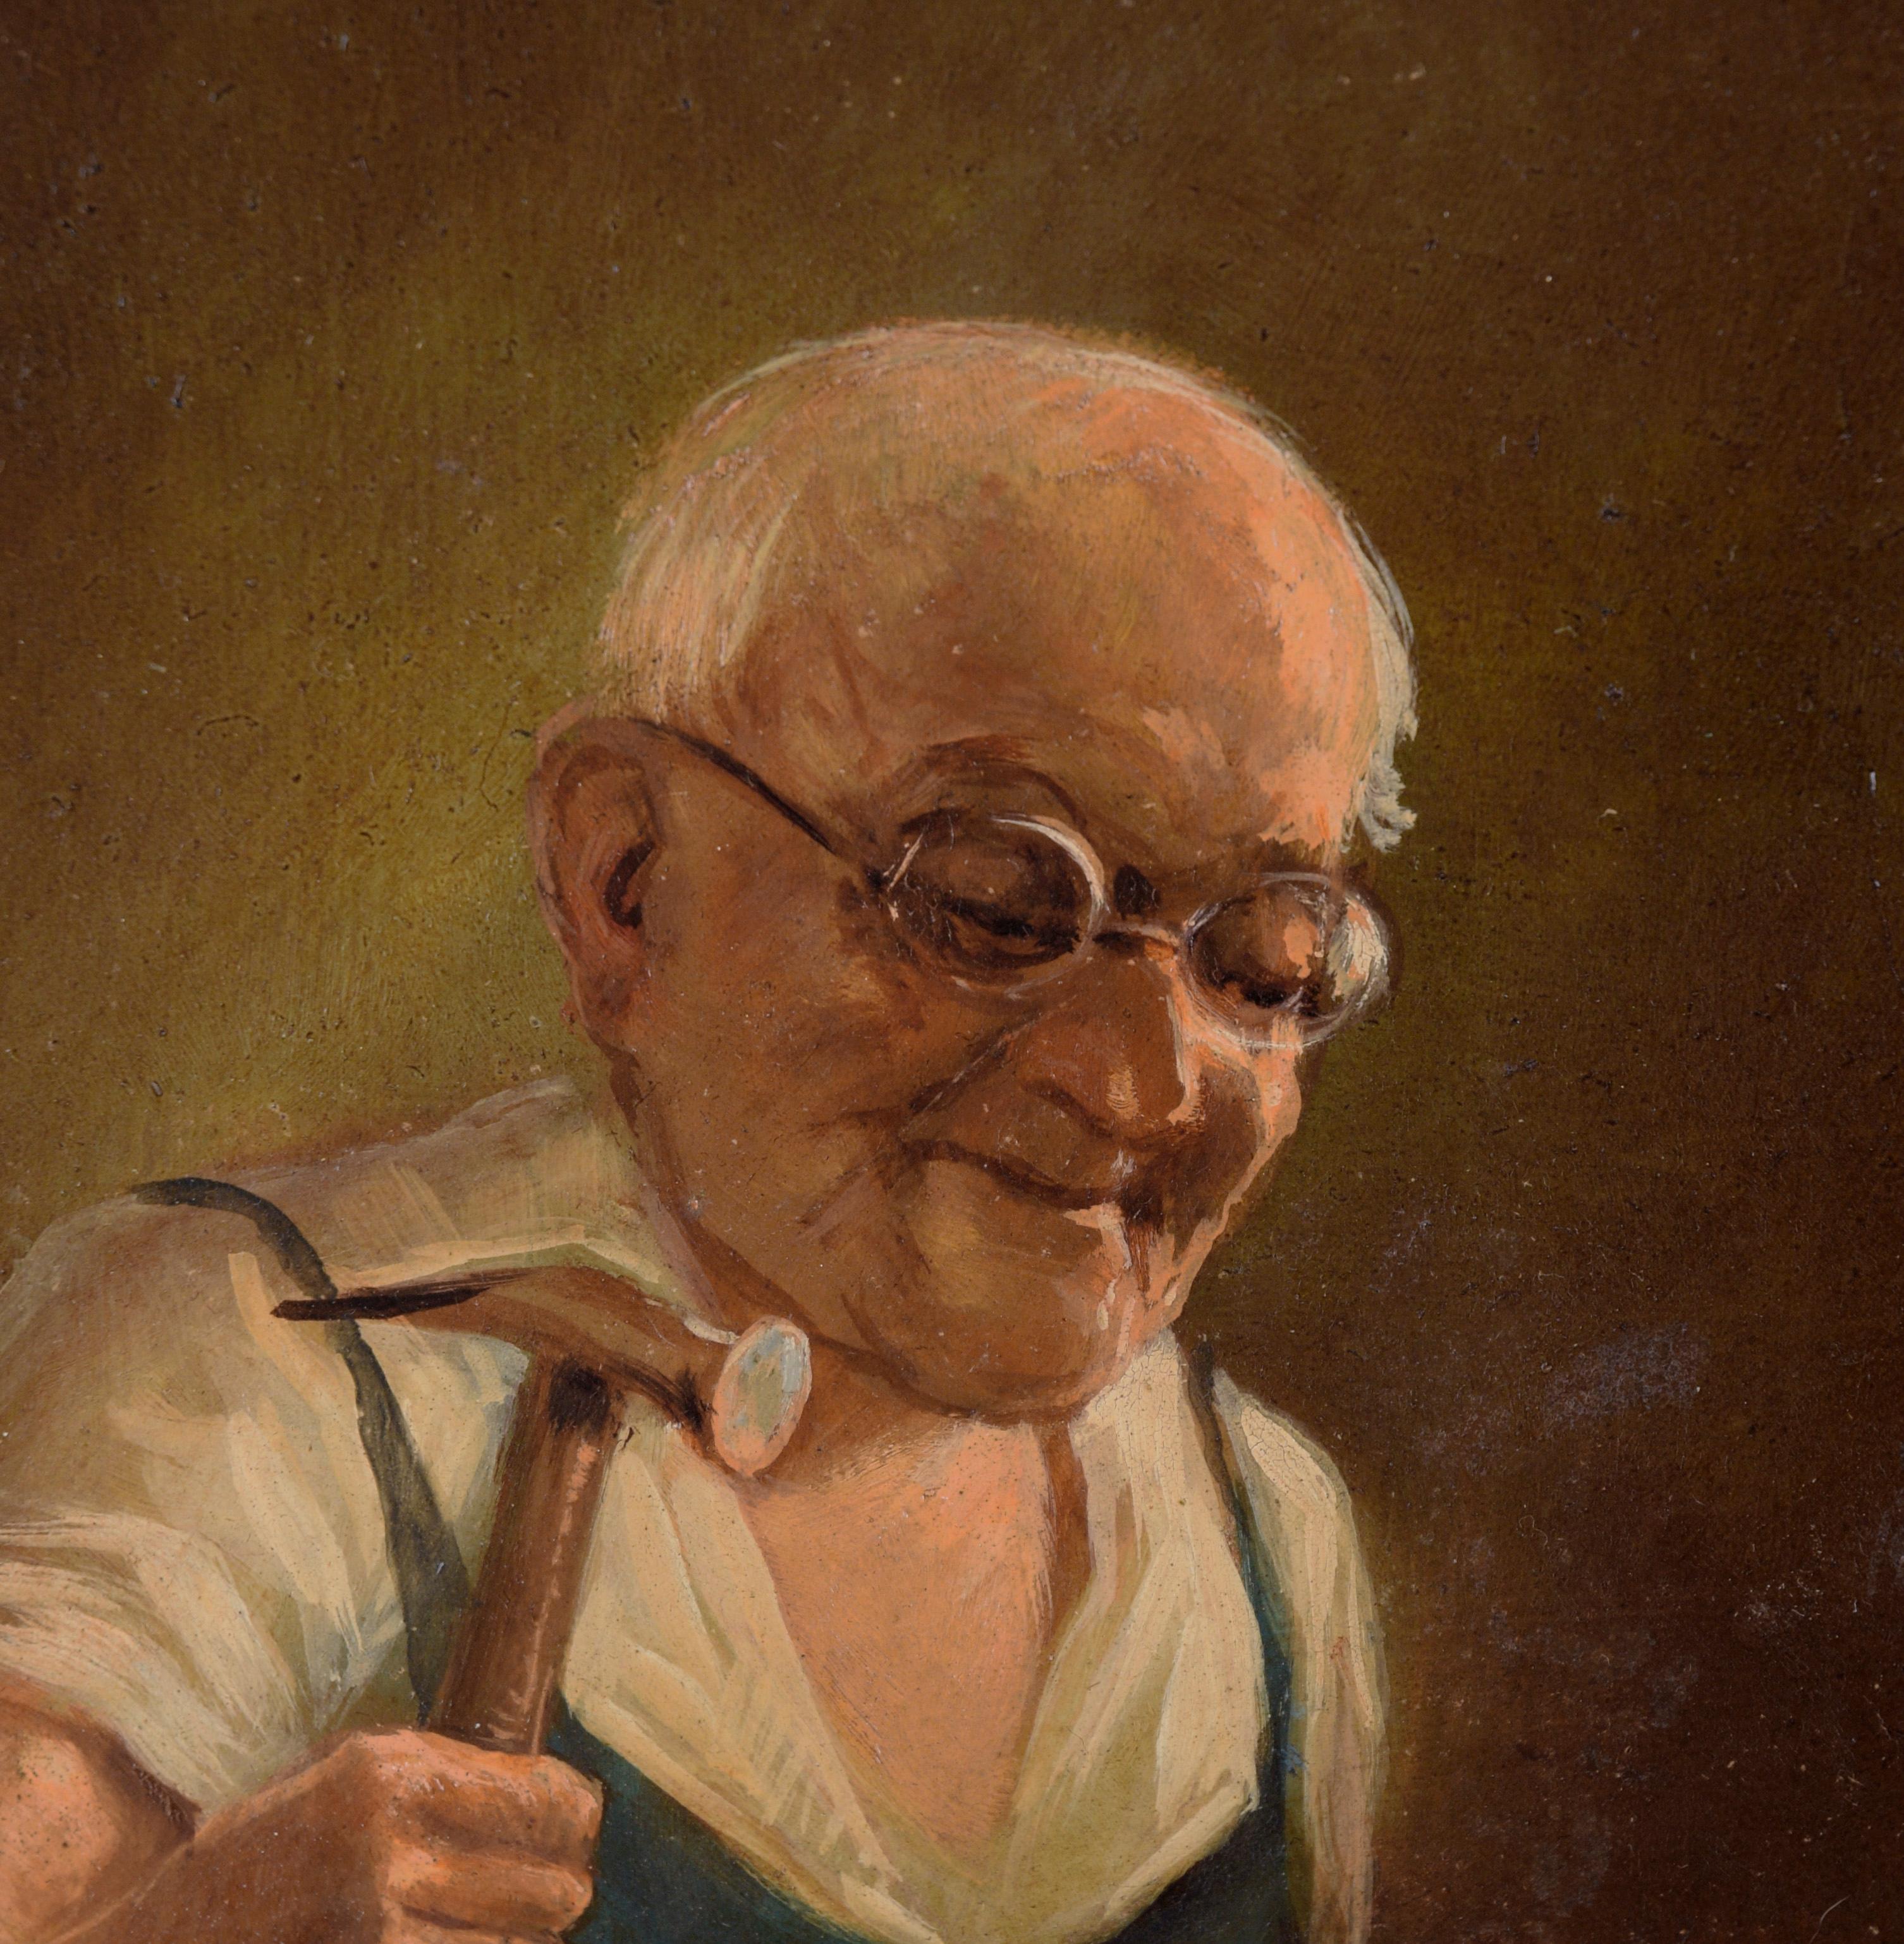 Shoemaker at Work - Portrait in Oil on Masonite

Lovely portrait of a cobbler at work by Max Schneider (German, 1903-1980). The shoemaker is holding a hammer, working on an upturned shoe at his bench. He is wearing a white shirt, green apron, and